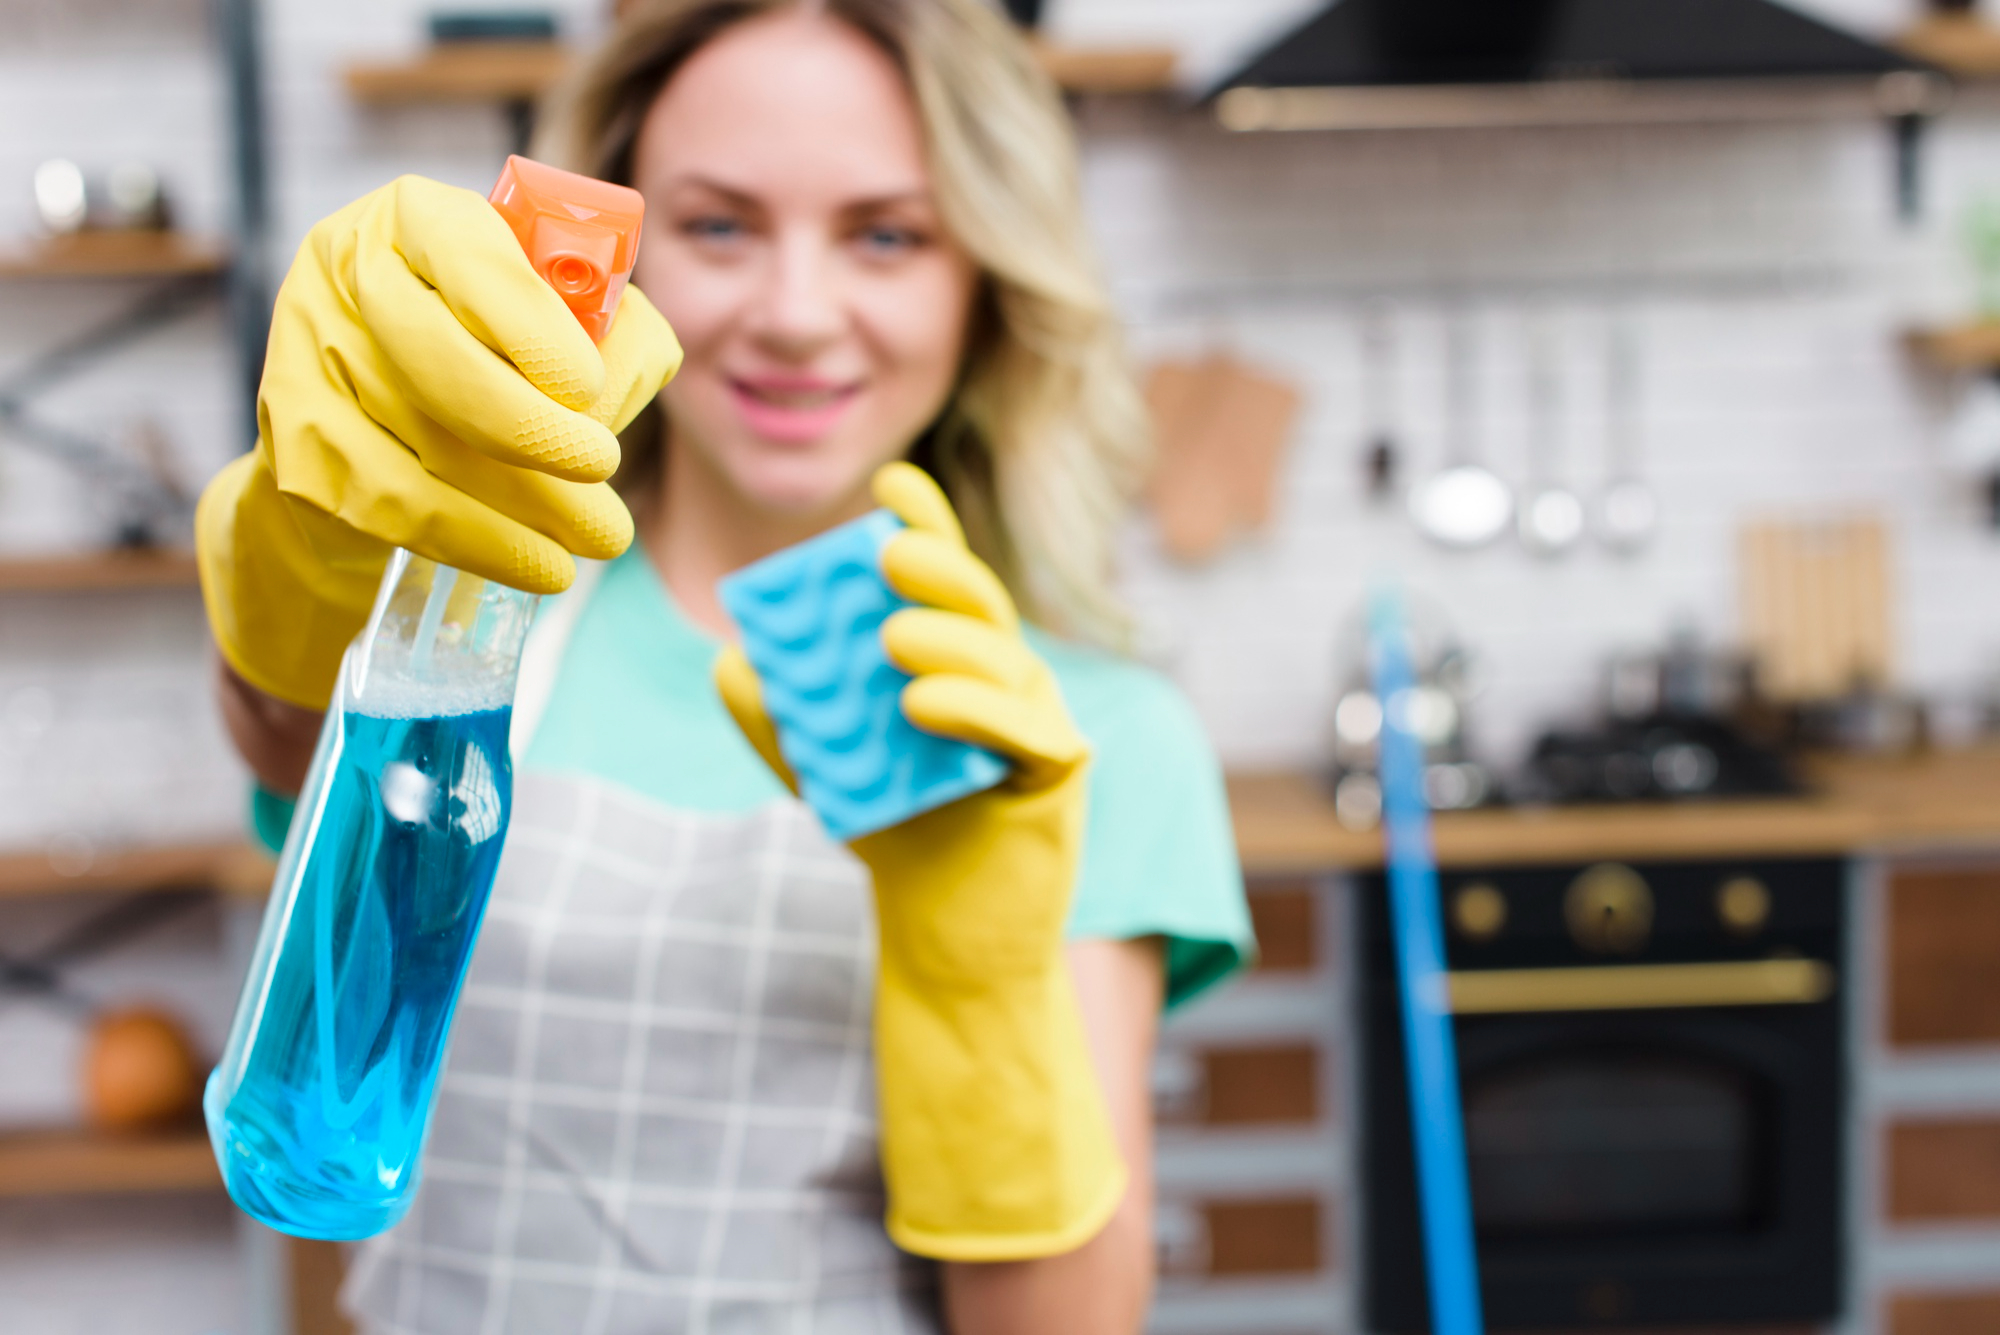 Woman wearing yellow gloves holding a bottle of cleaning solution and a sponge, implying housework or cleaning activity.